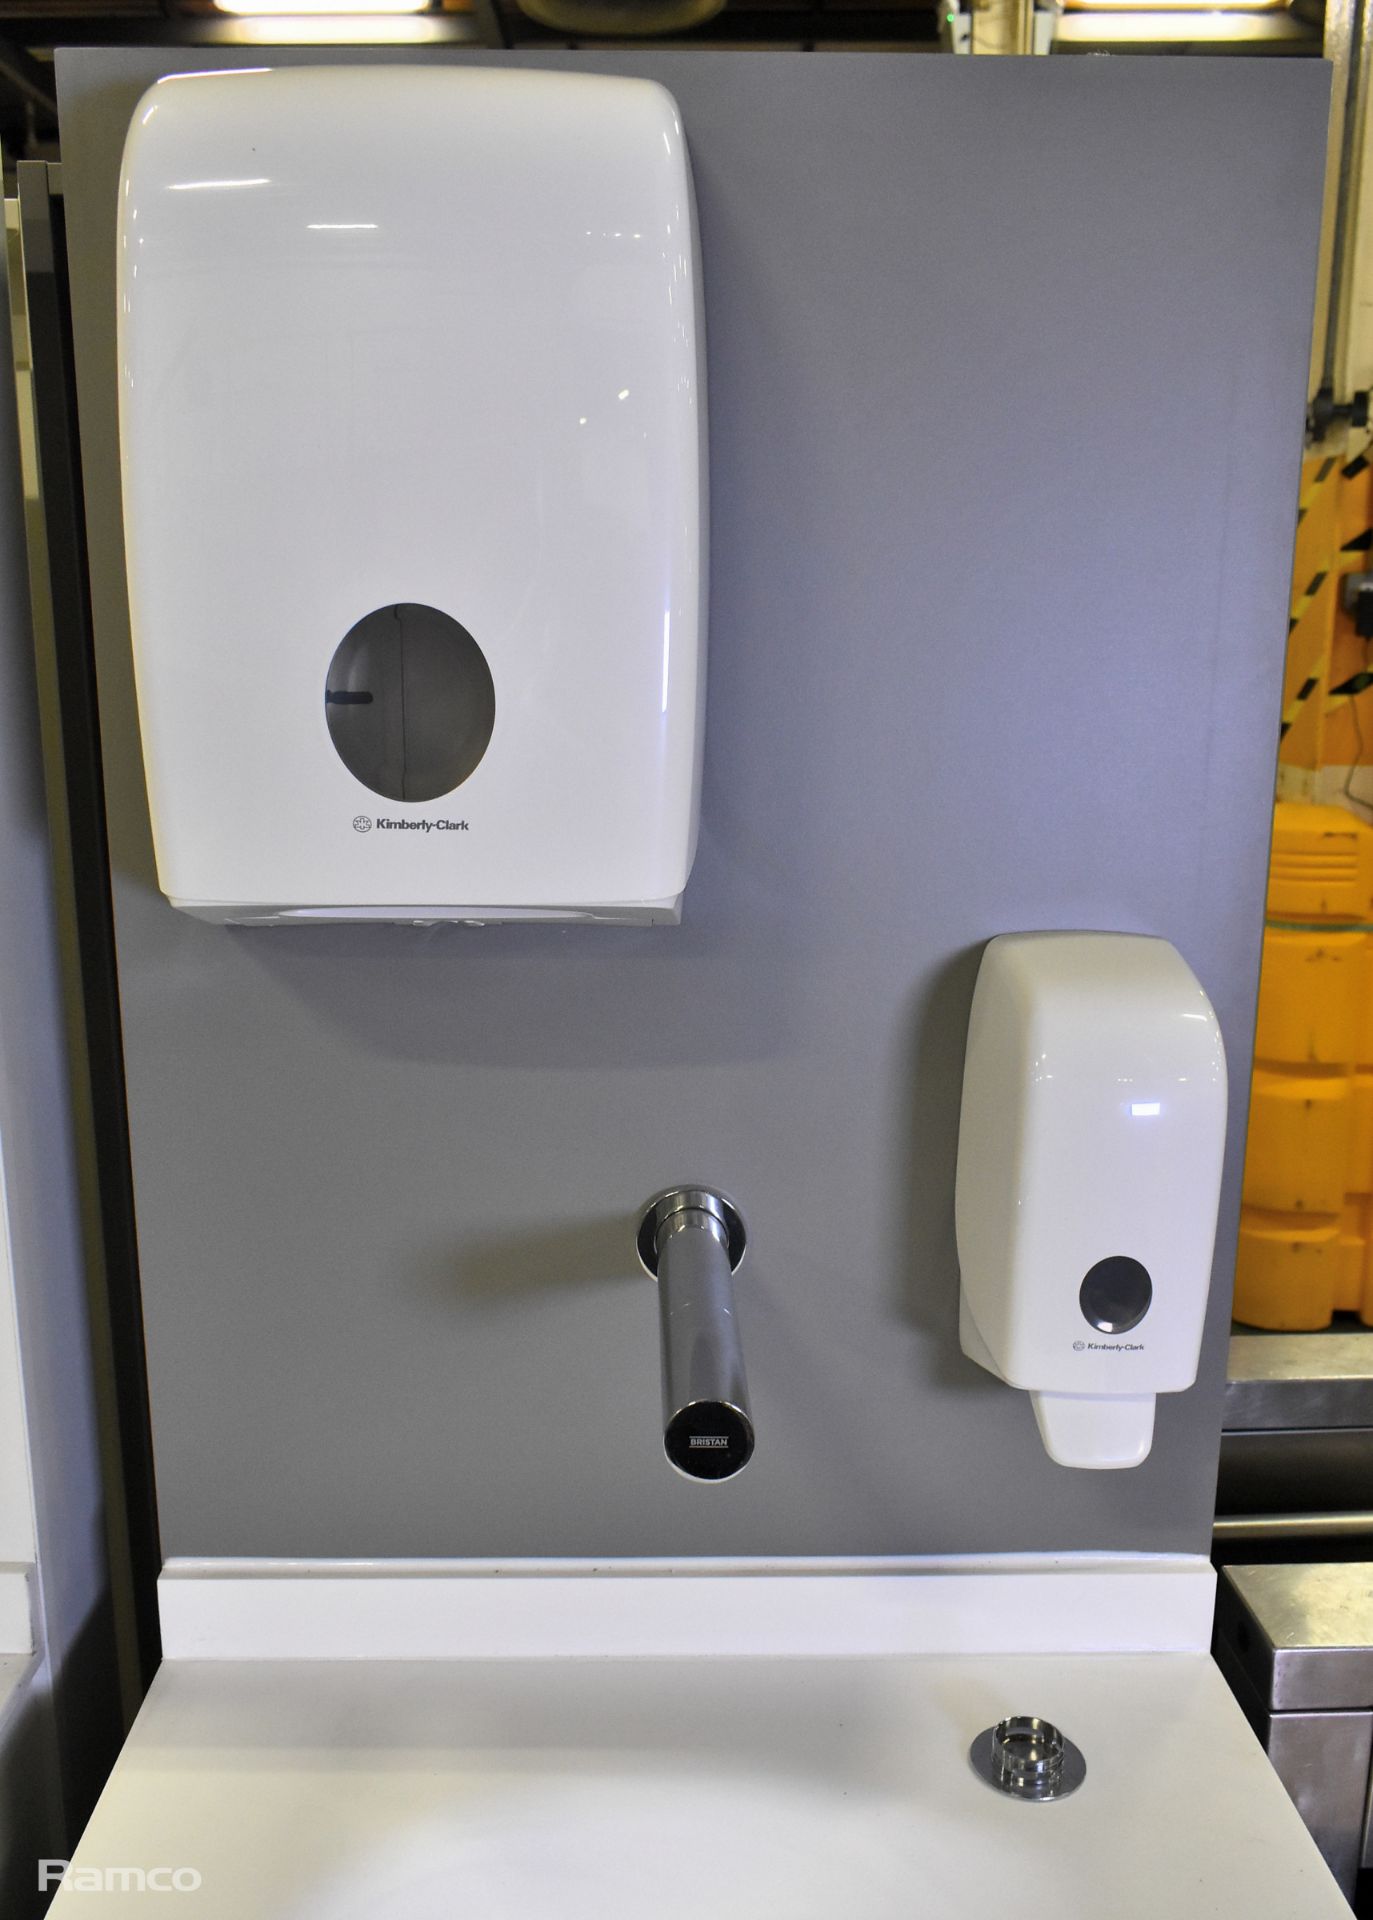 Portable hand wash station with under counter storage & Armitage Shanks mixer tap L 600 x W 680 - Image 2 of 5